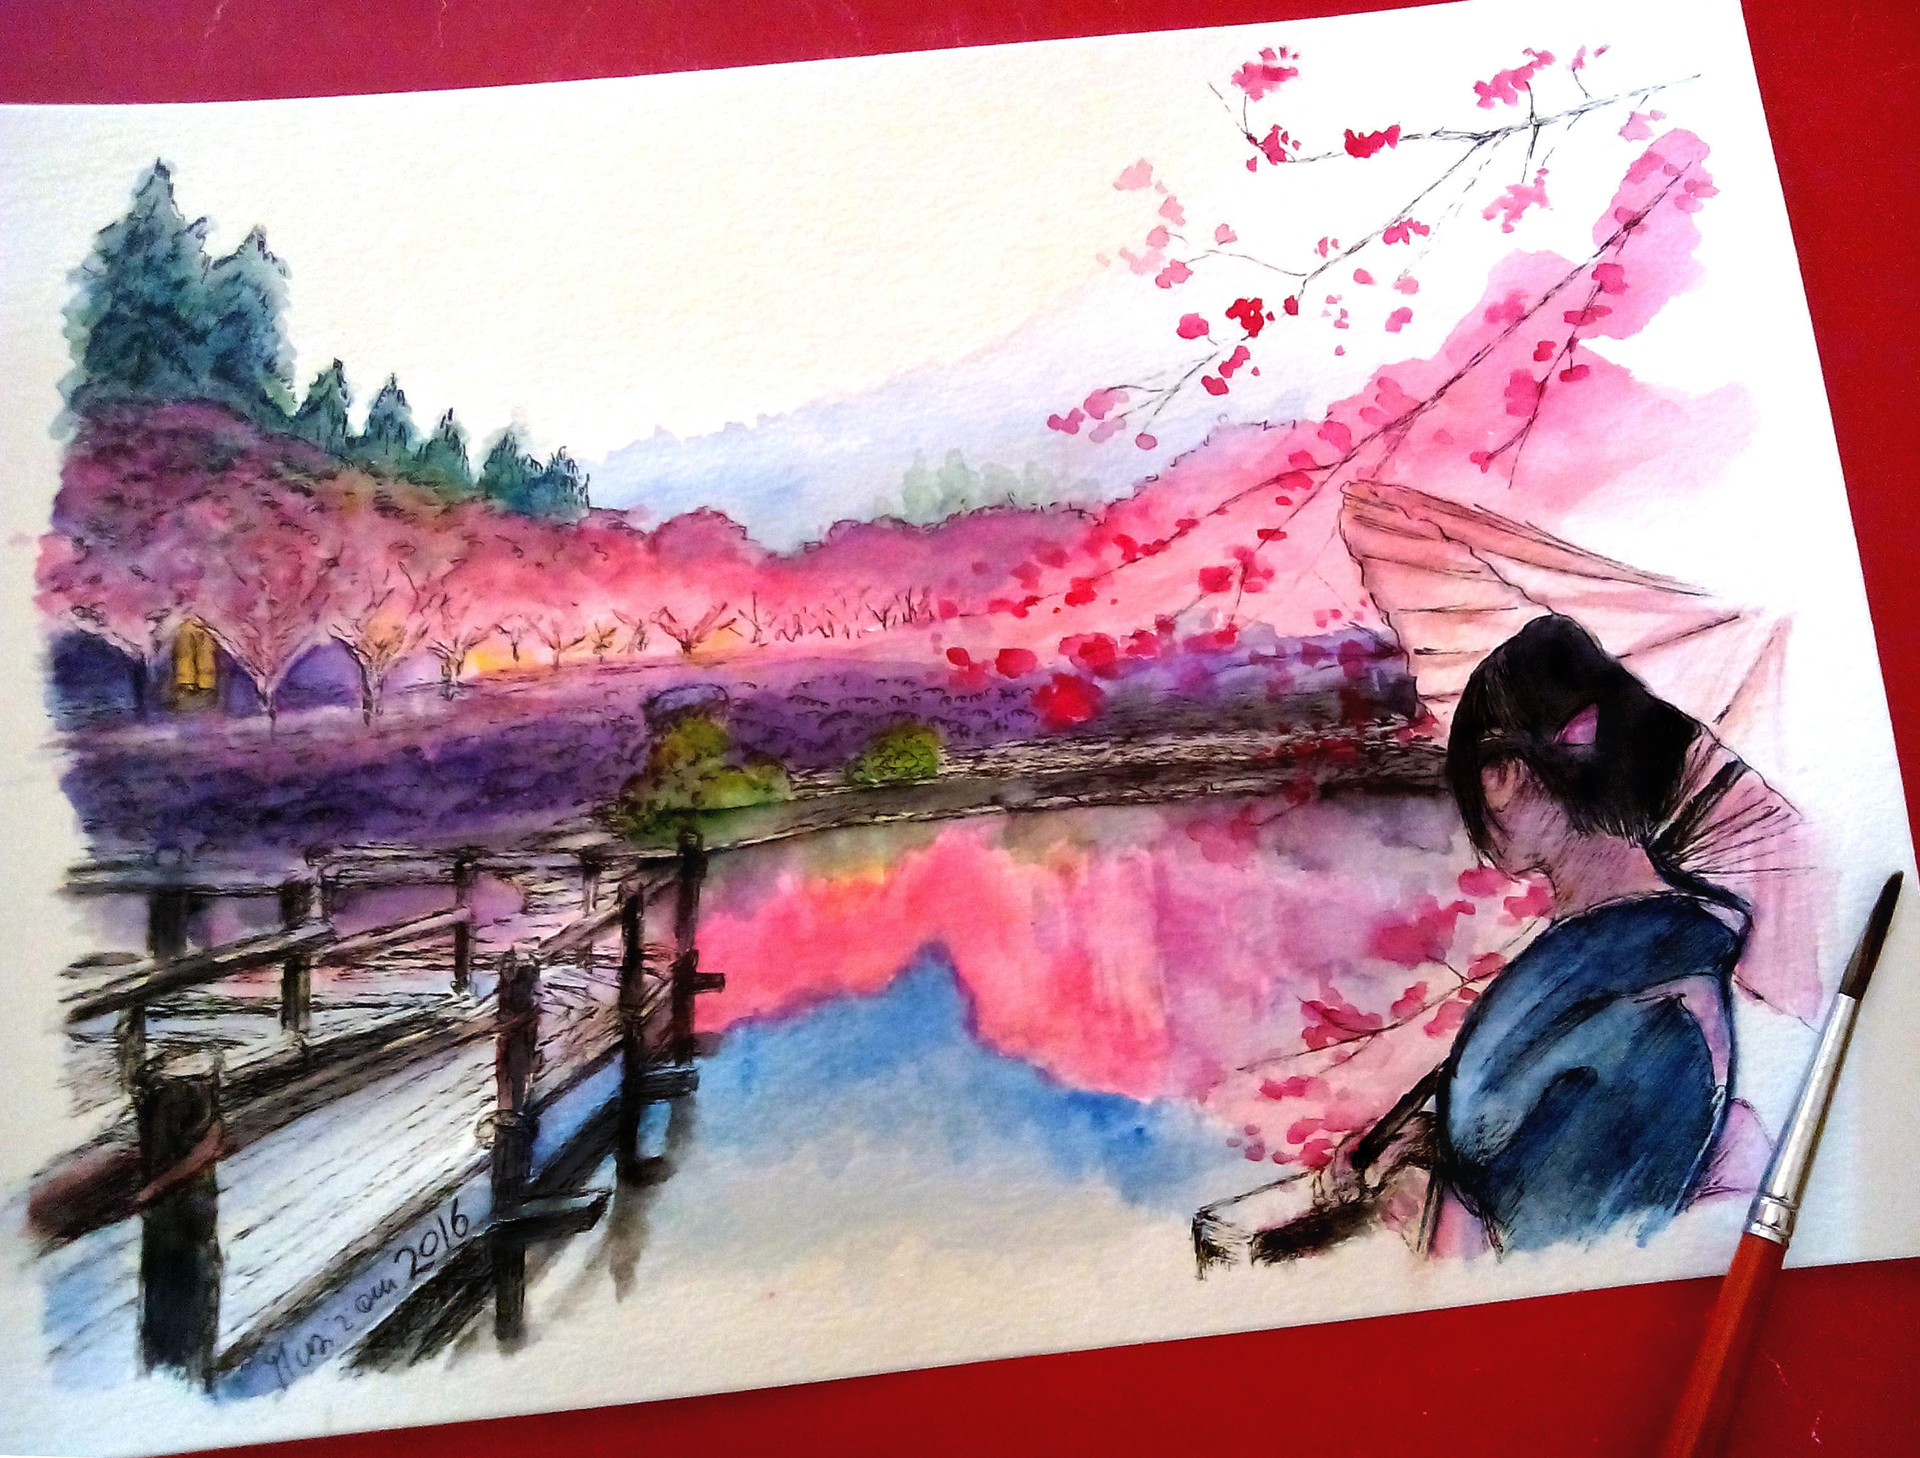 ArtStation - Japanese landscape - Ink and watercolors